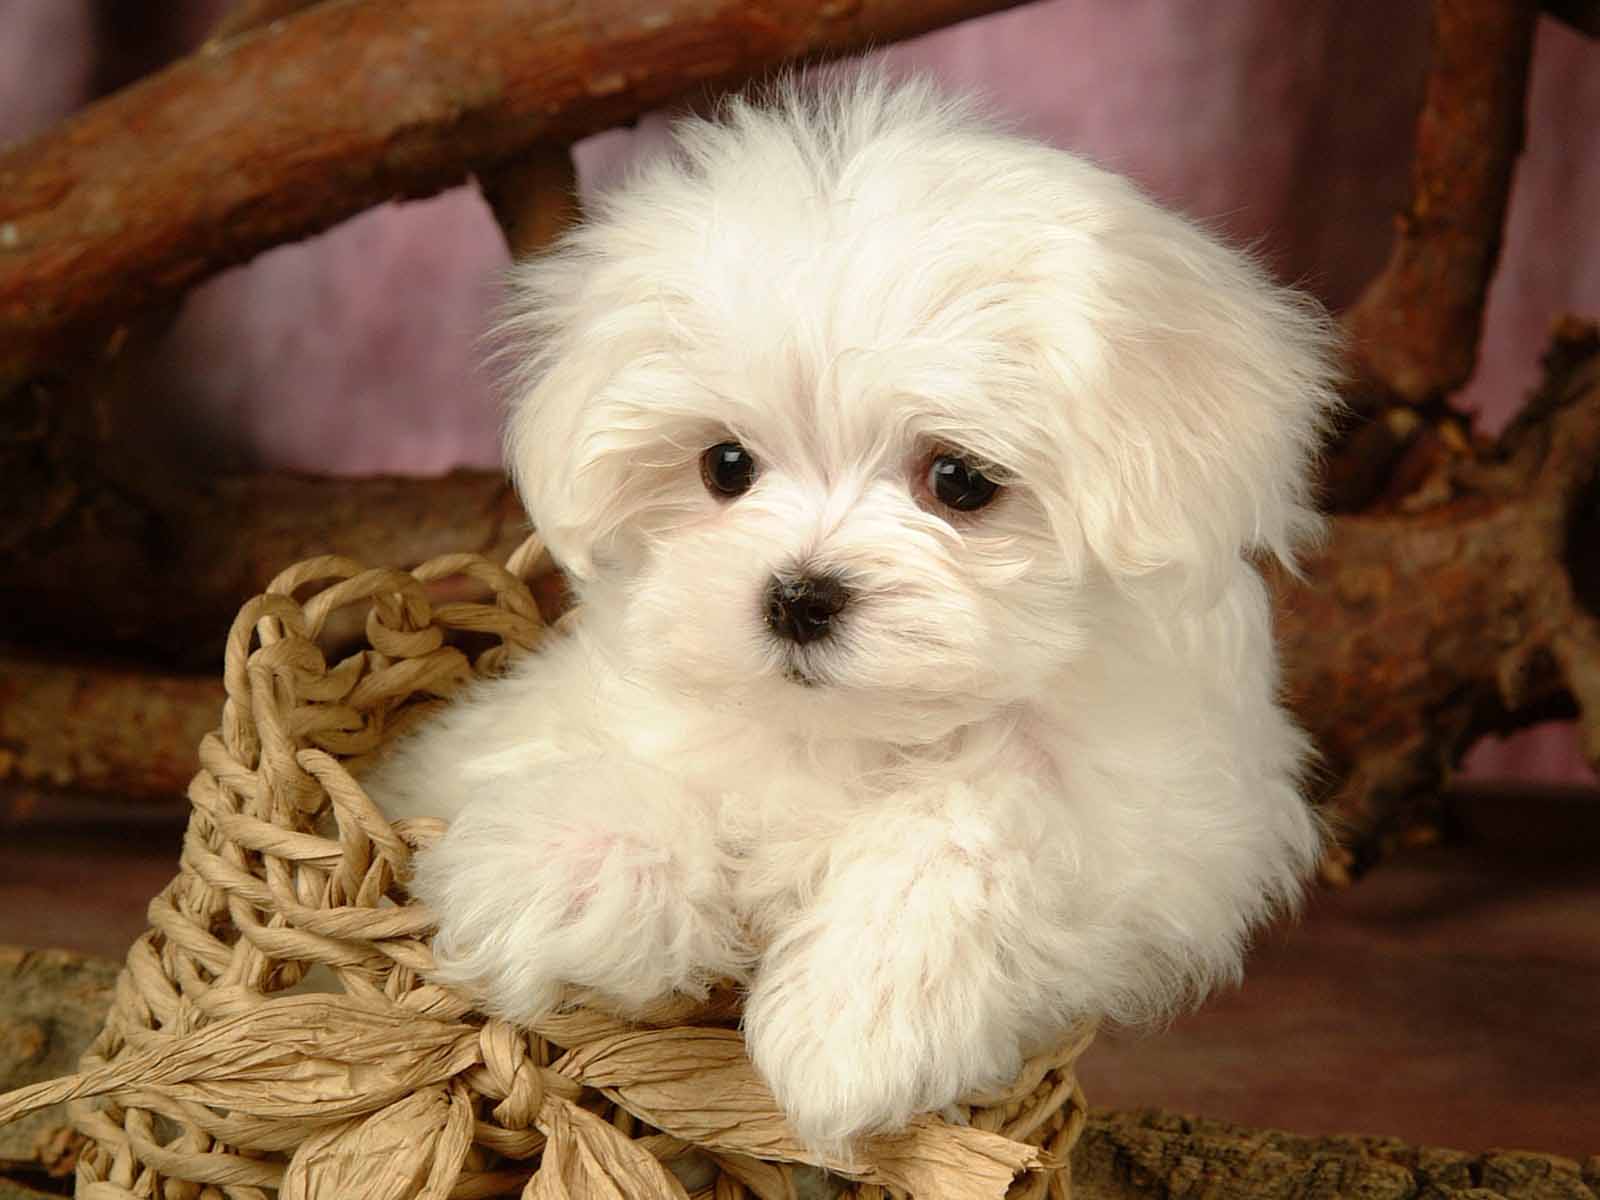 Wallpapers Of Cute Puppies - Wallpaper Cave